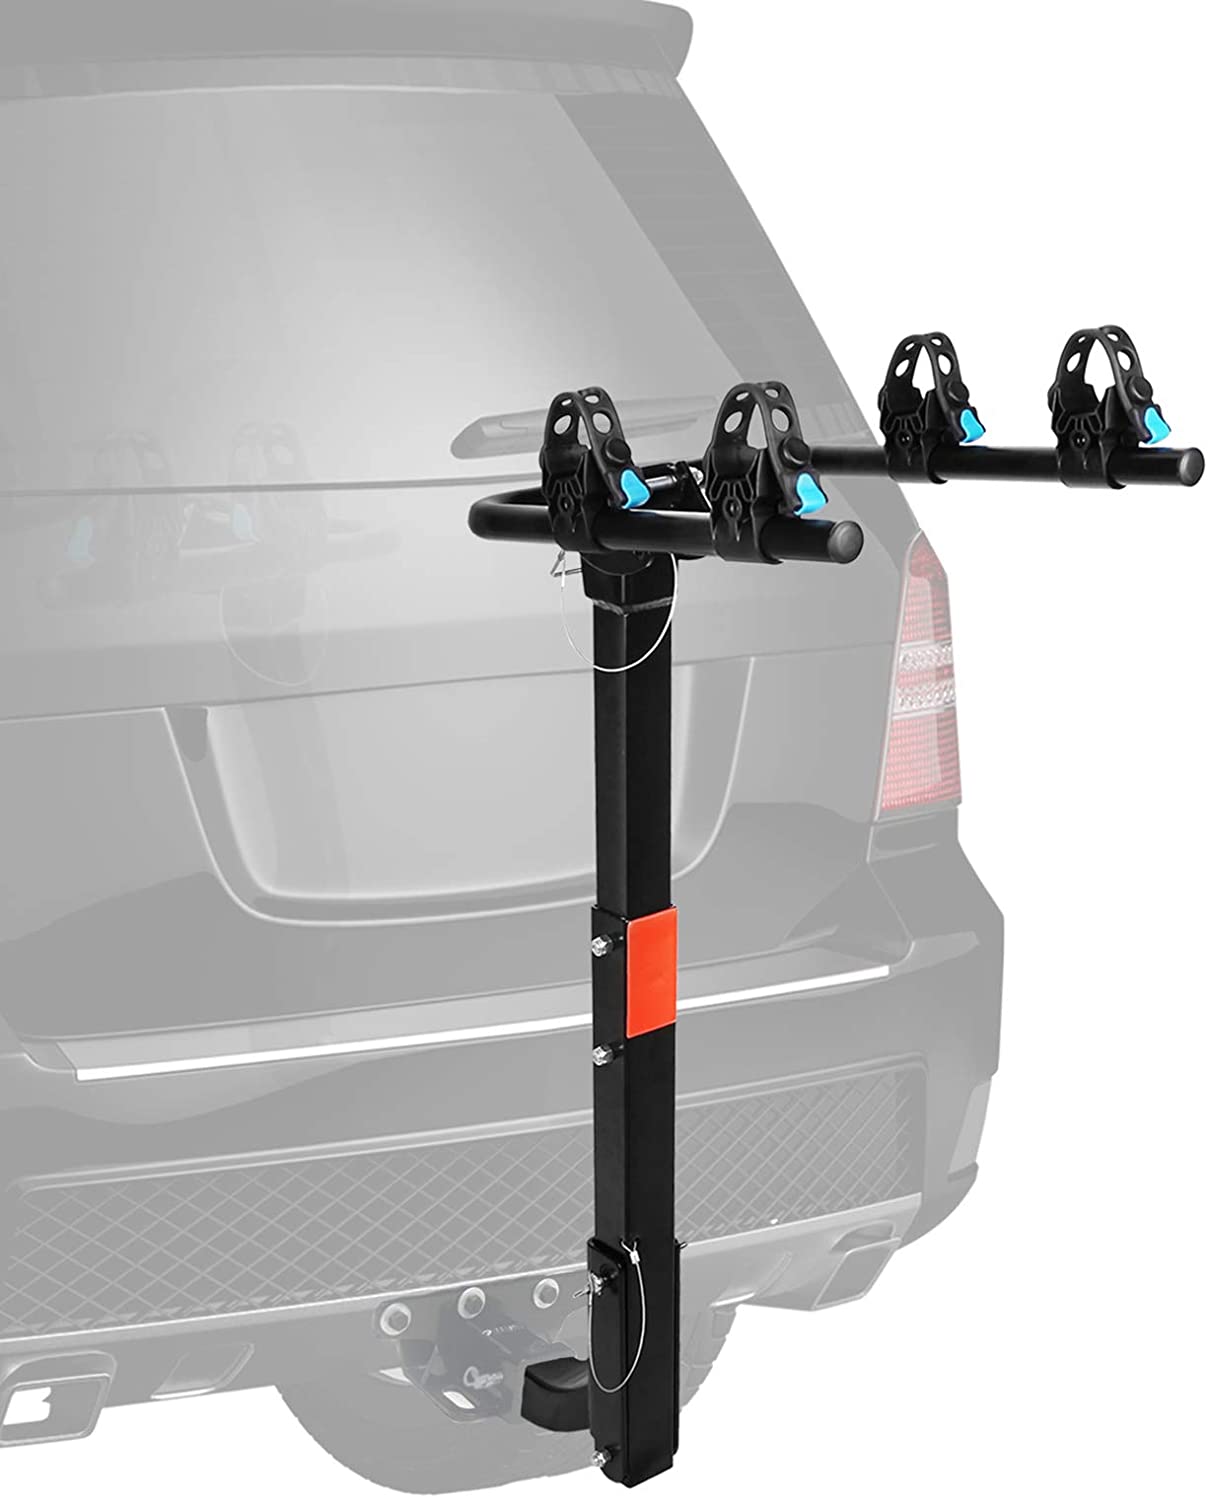 XCAR 2-Bike Bicycle Hitch Mount Carrier Rack Fit for 2